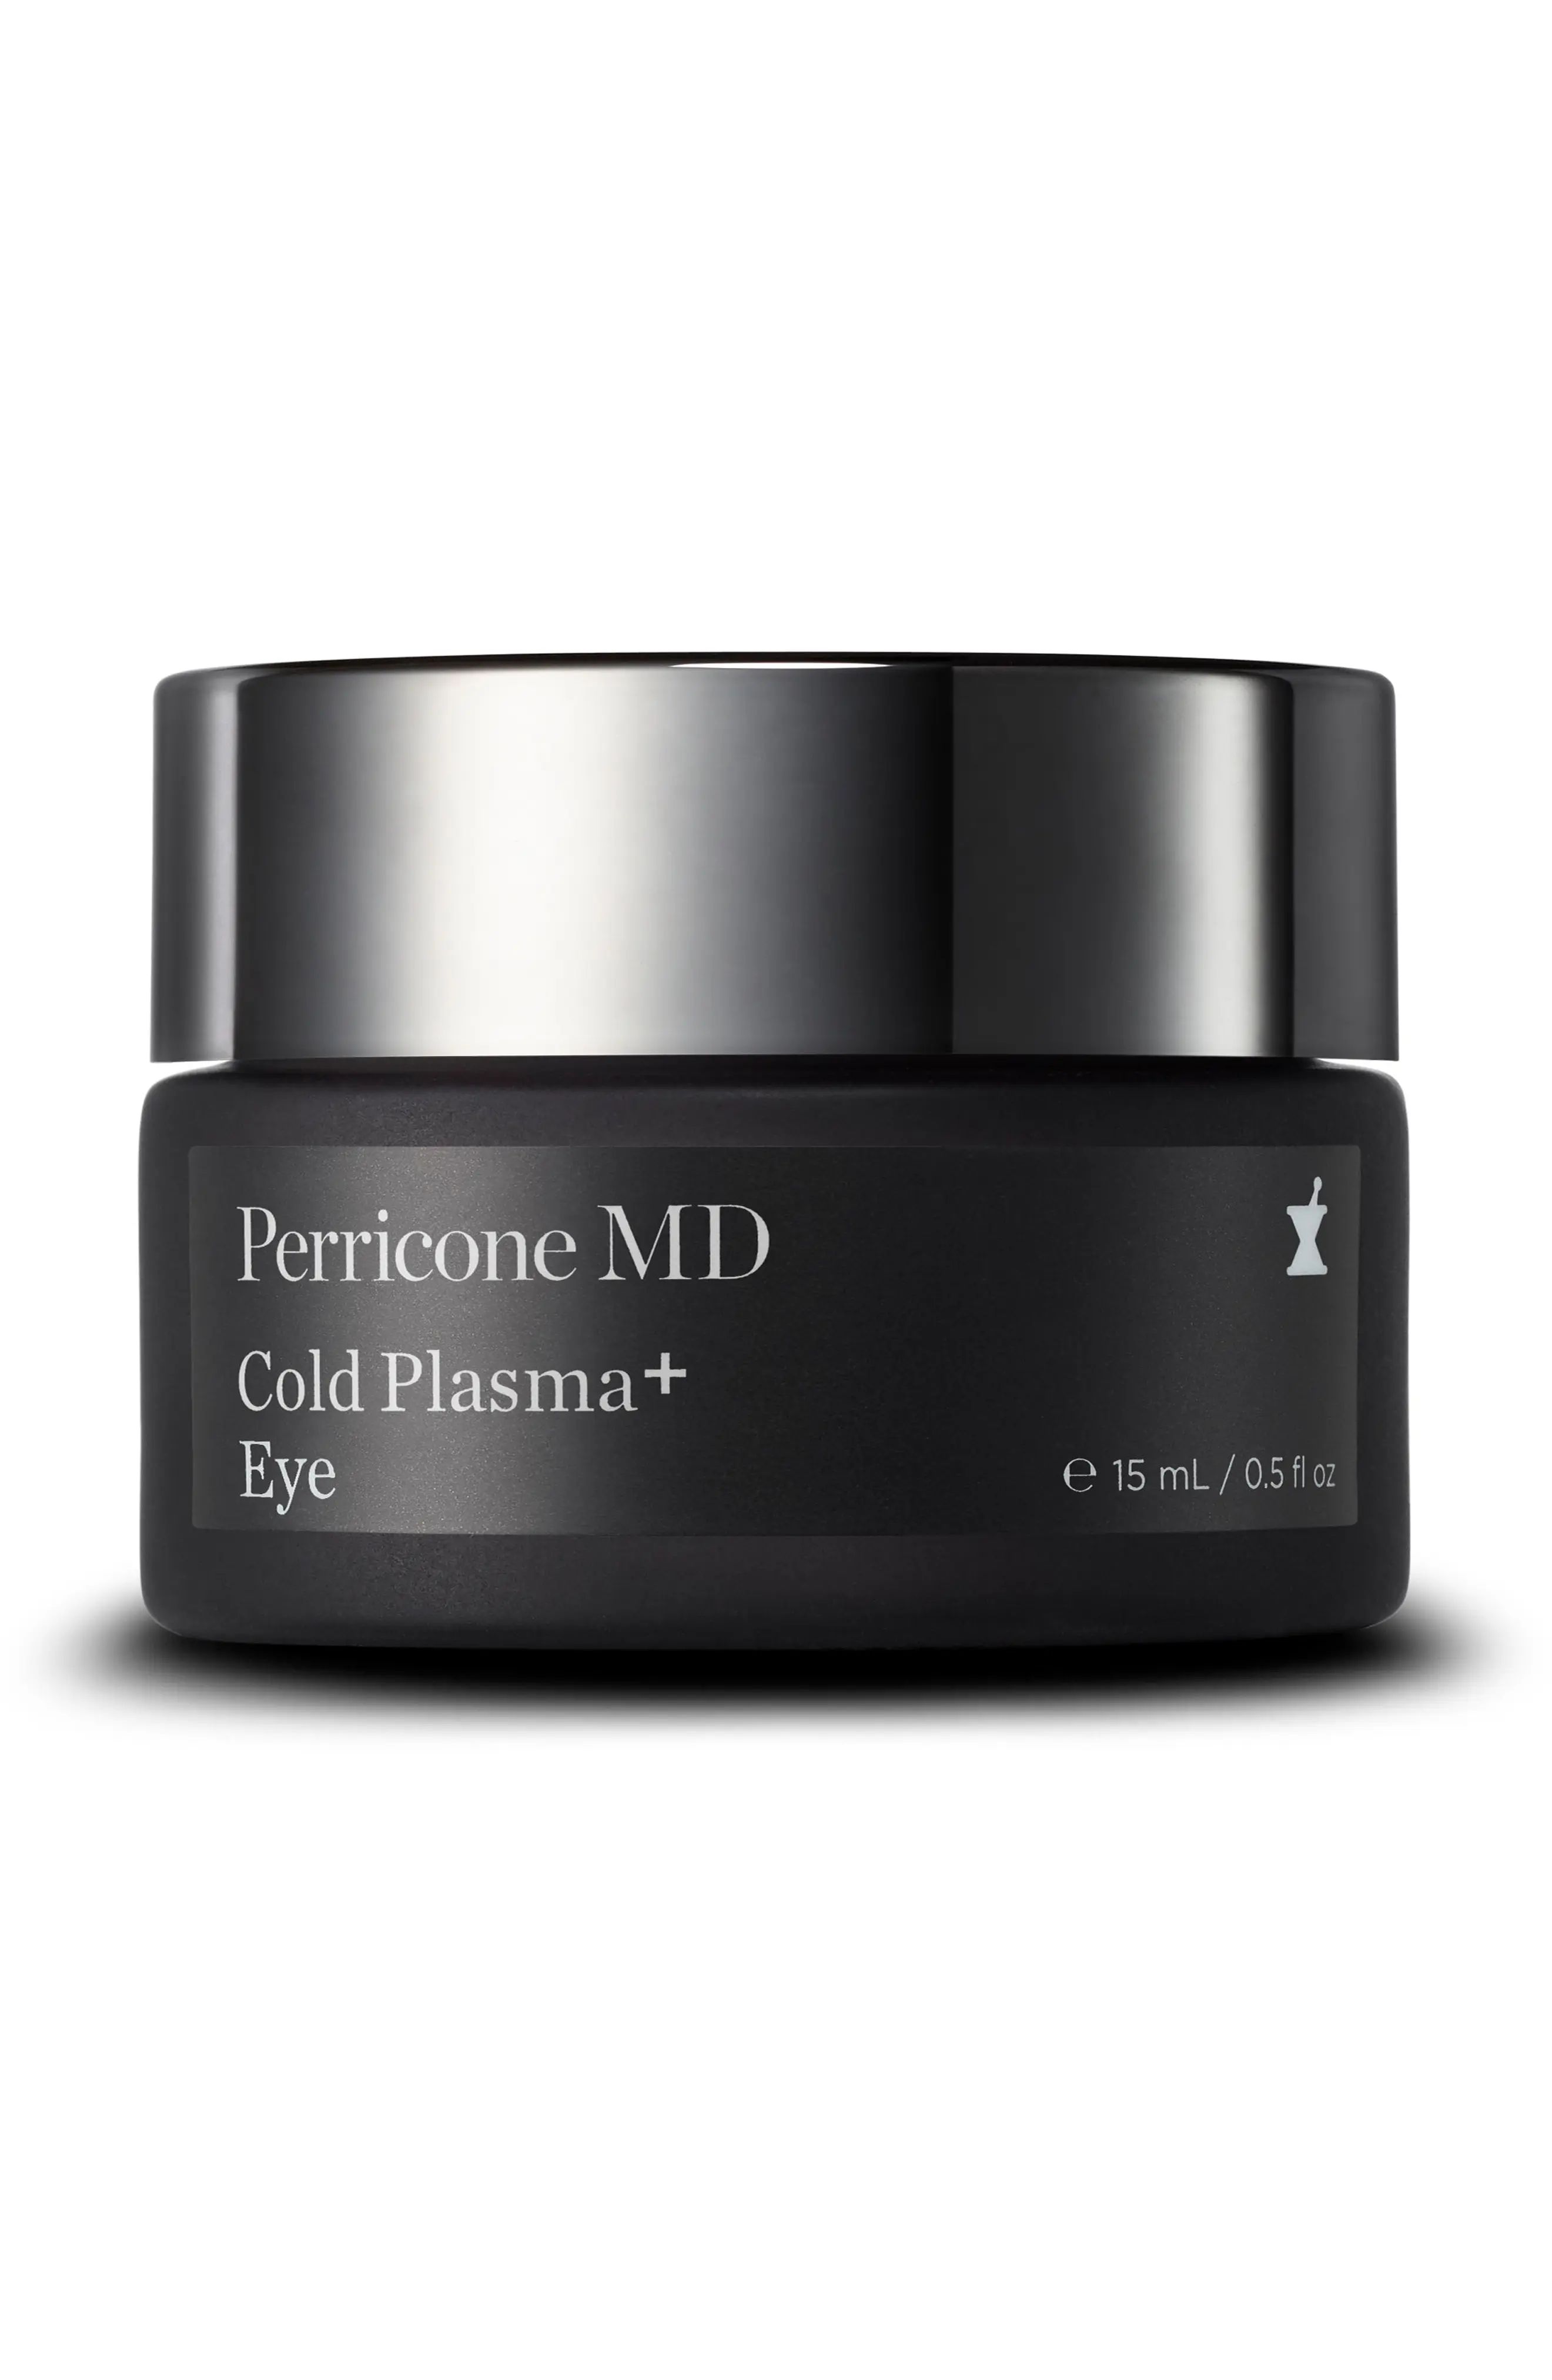 Perricone MD Cold Plasma+ Eye at Nordstrom | Nordstrom